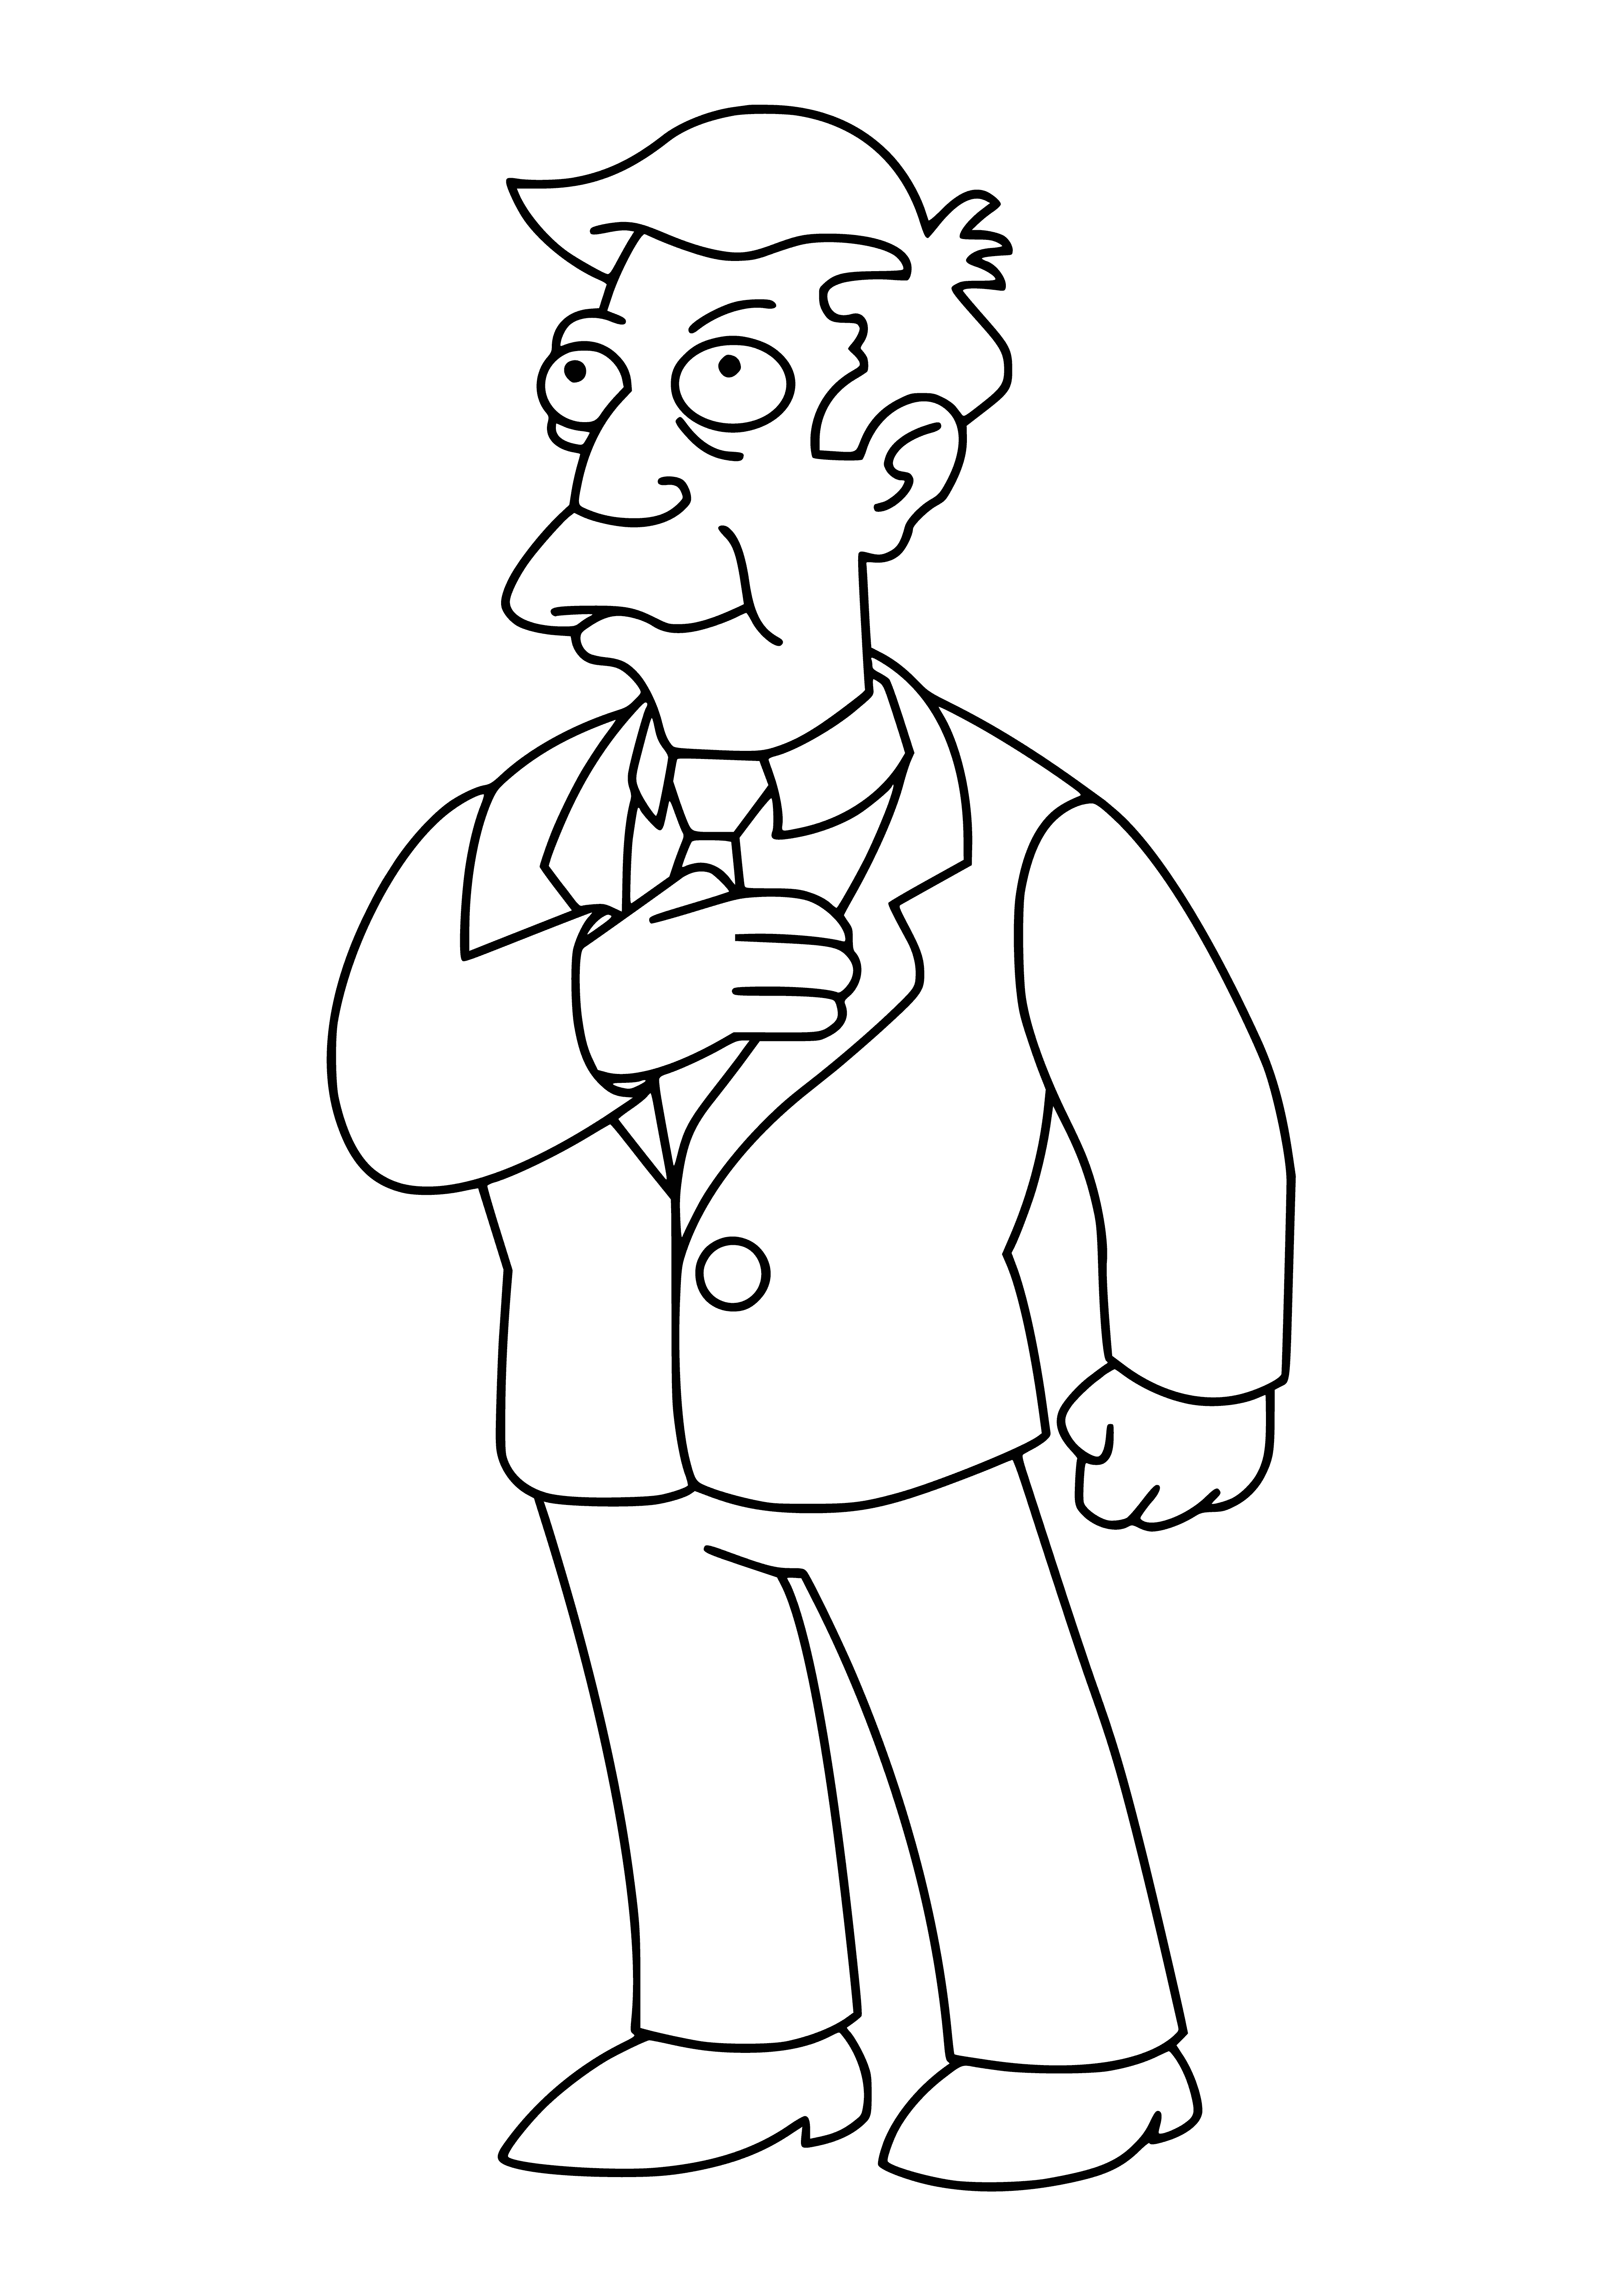 coloring page: Coloring page of School Principal Seymour Skinner, gray hair, glasses & suit; stern facial expression.